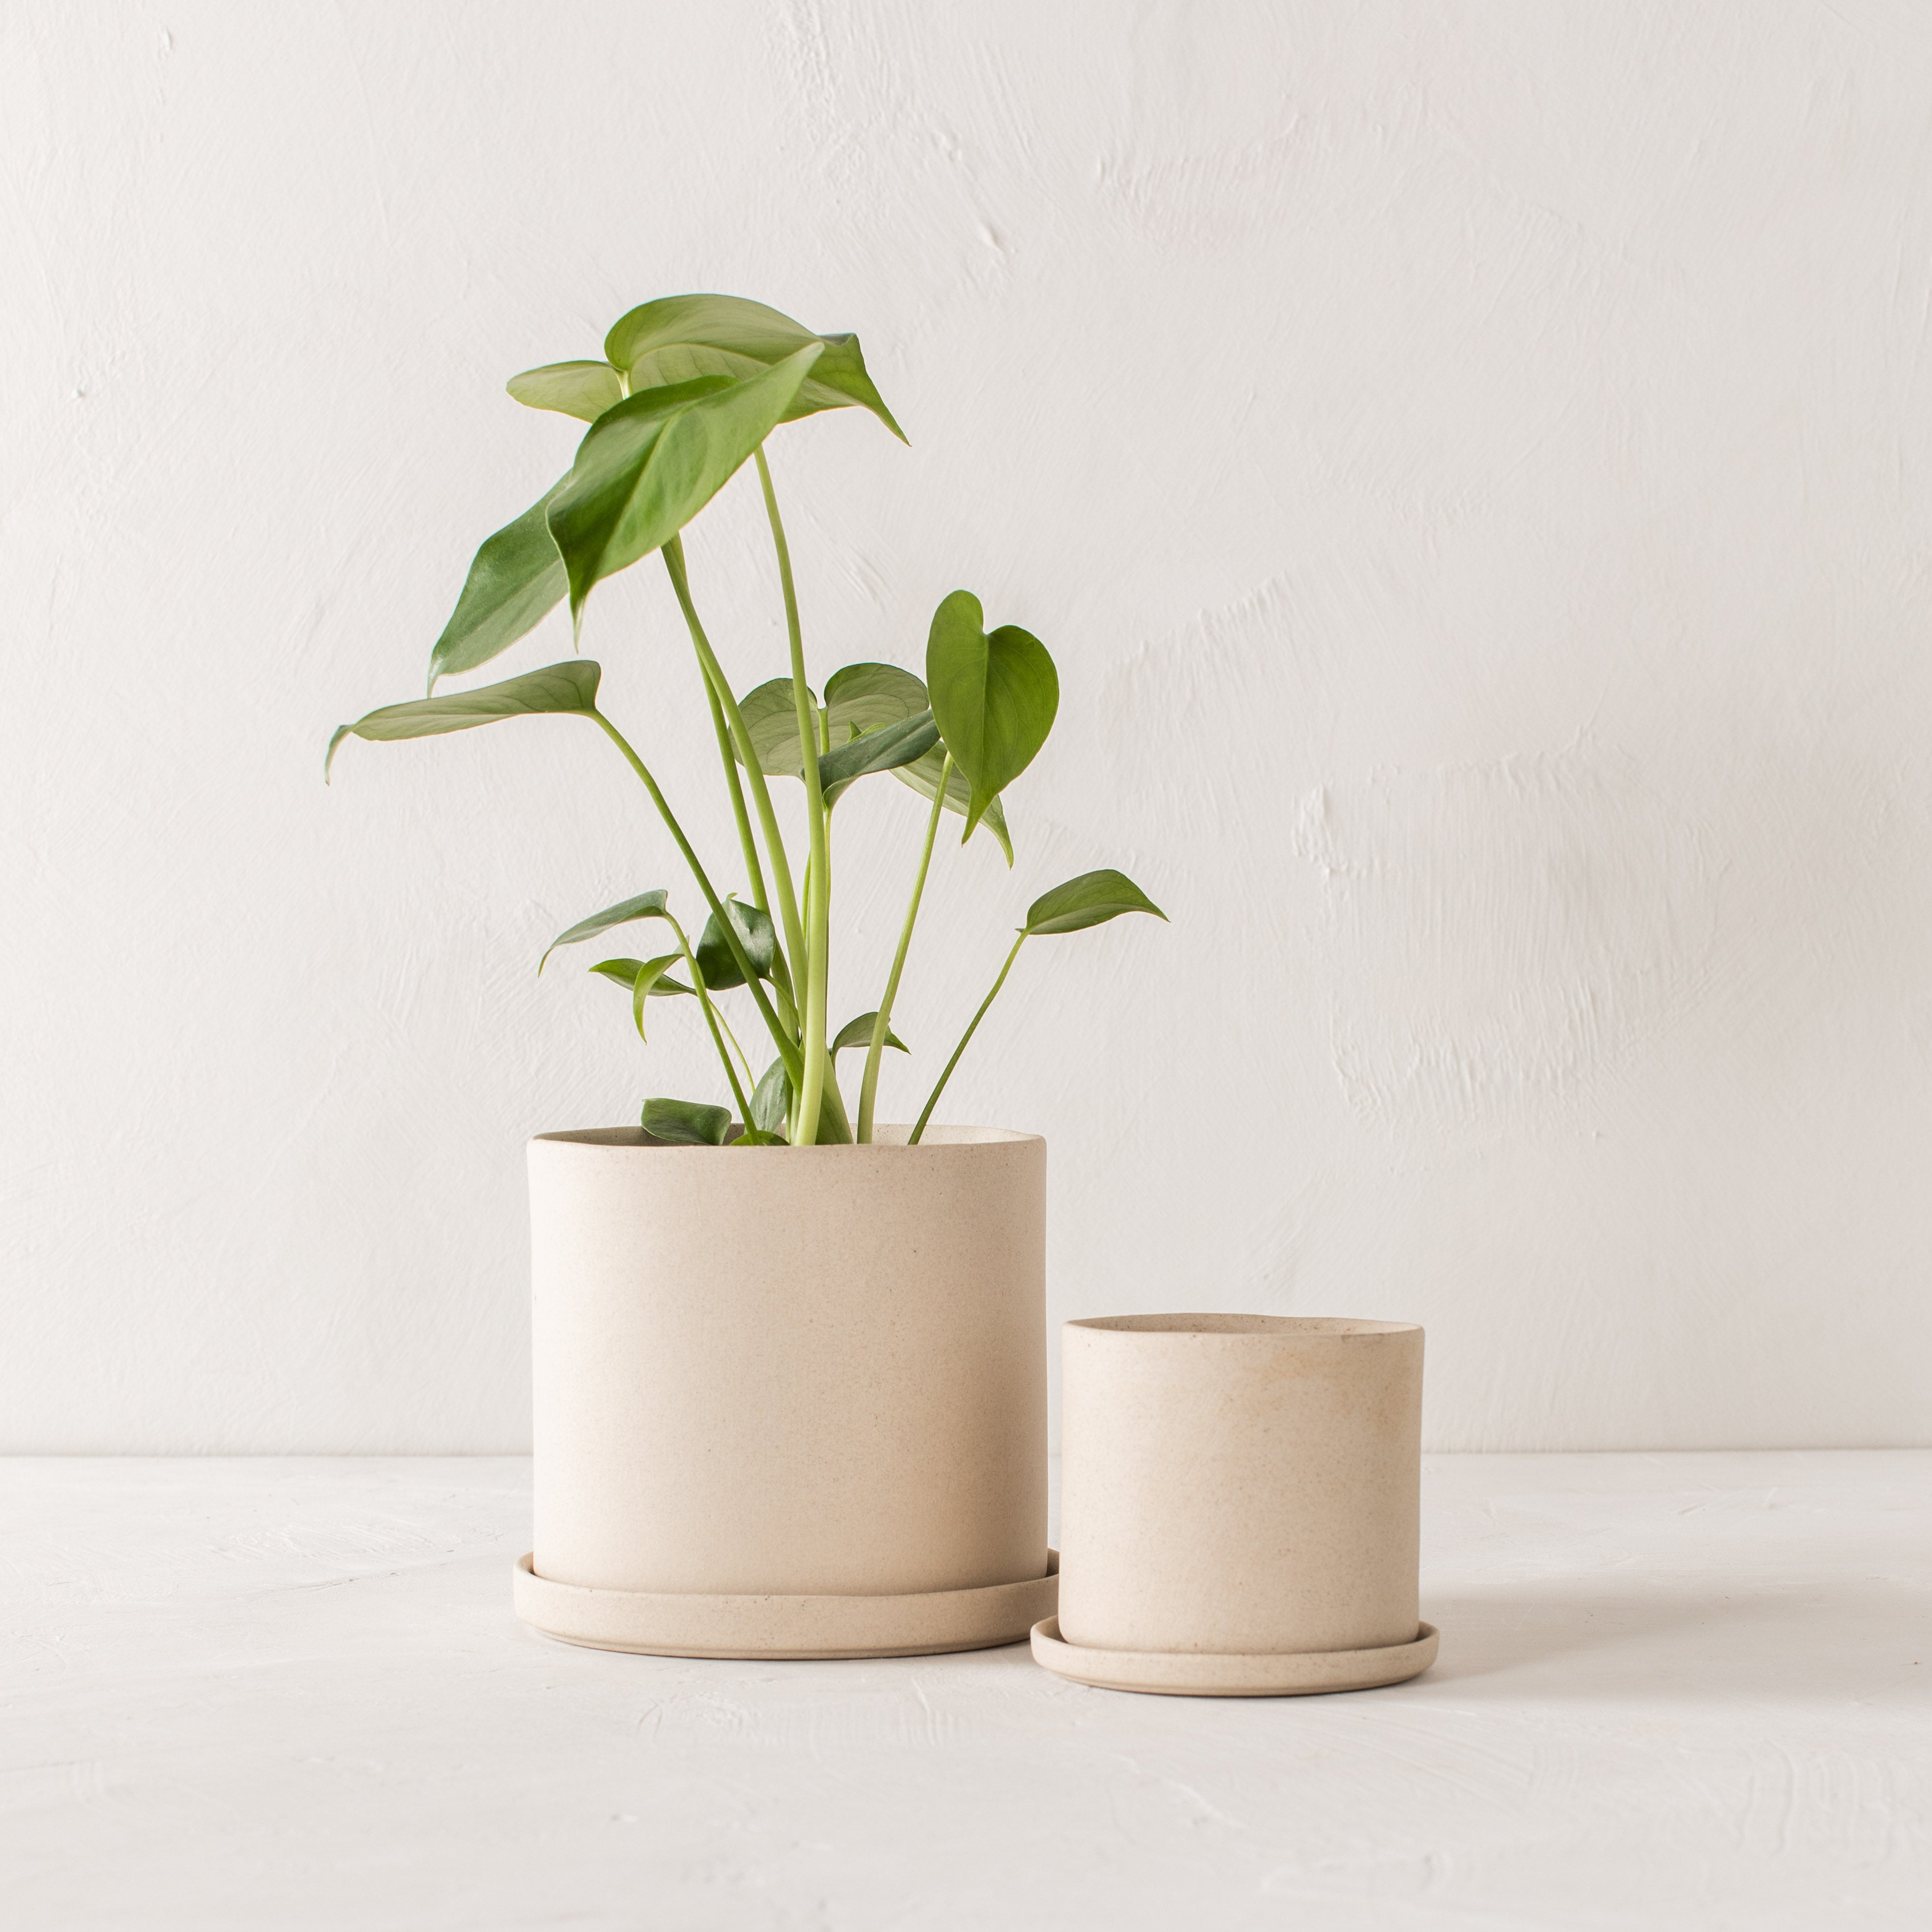 Two minimal stoneware ceramic planters side by side. Both with drainage bottom dishes. From left to right; six inch planter with monstera plant inside, 4 inch stoneware planter. Handmade stonware planters designed and sold by Convivial Production, Kansas City ceramics.